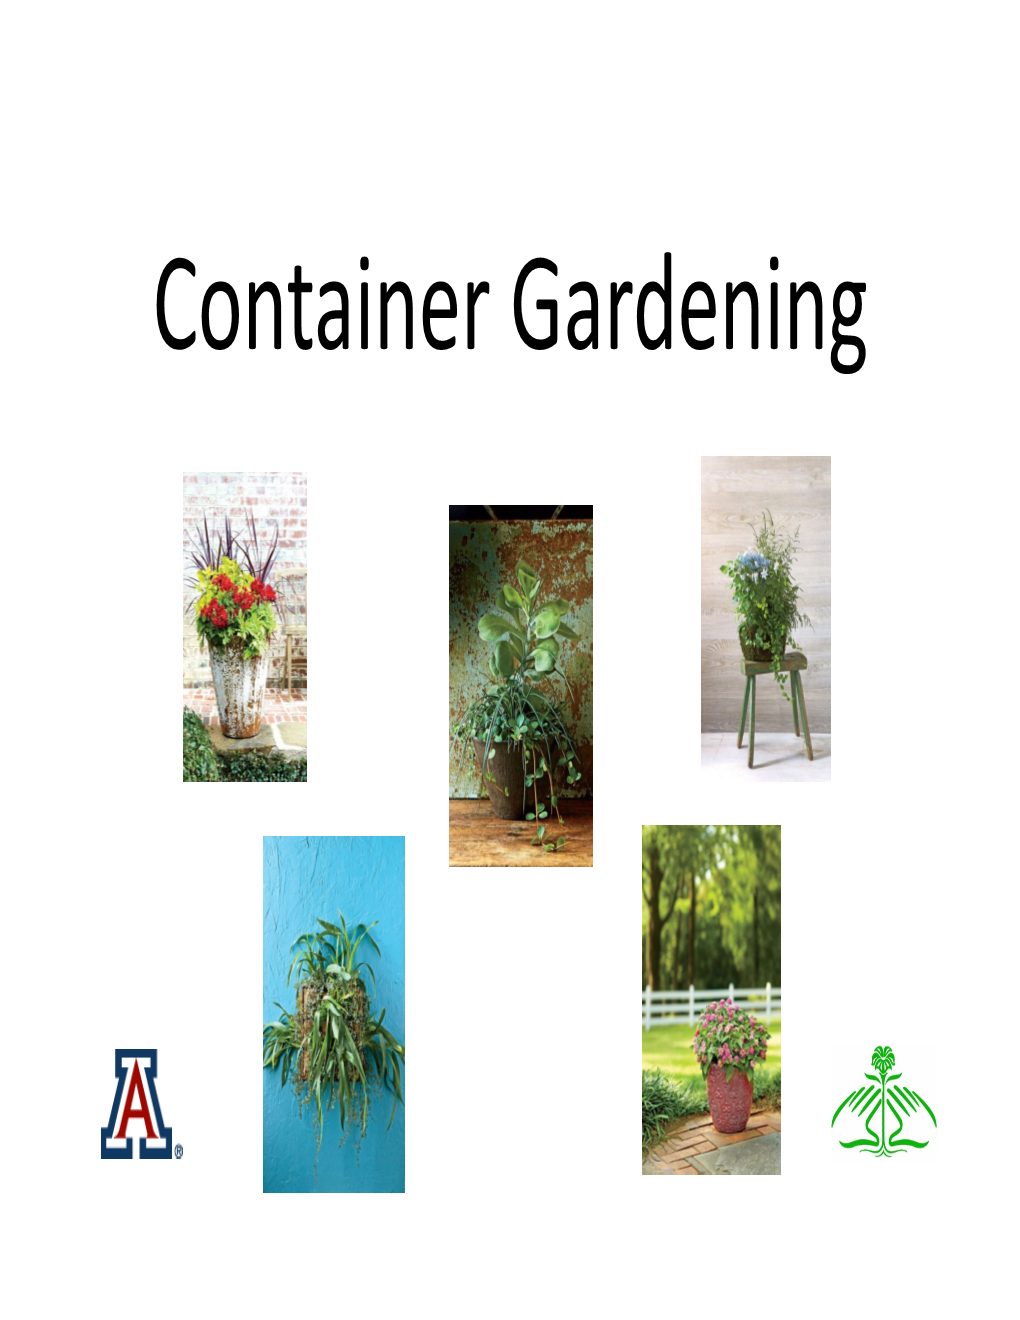 Container Gardening Why Create a Container Garden?